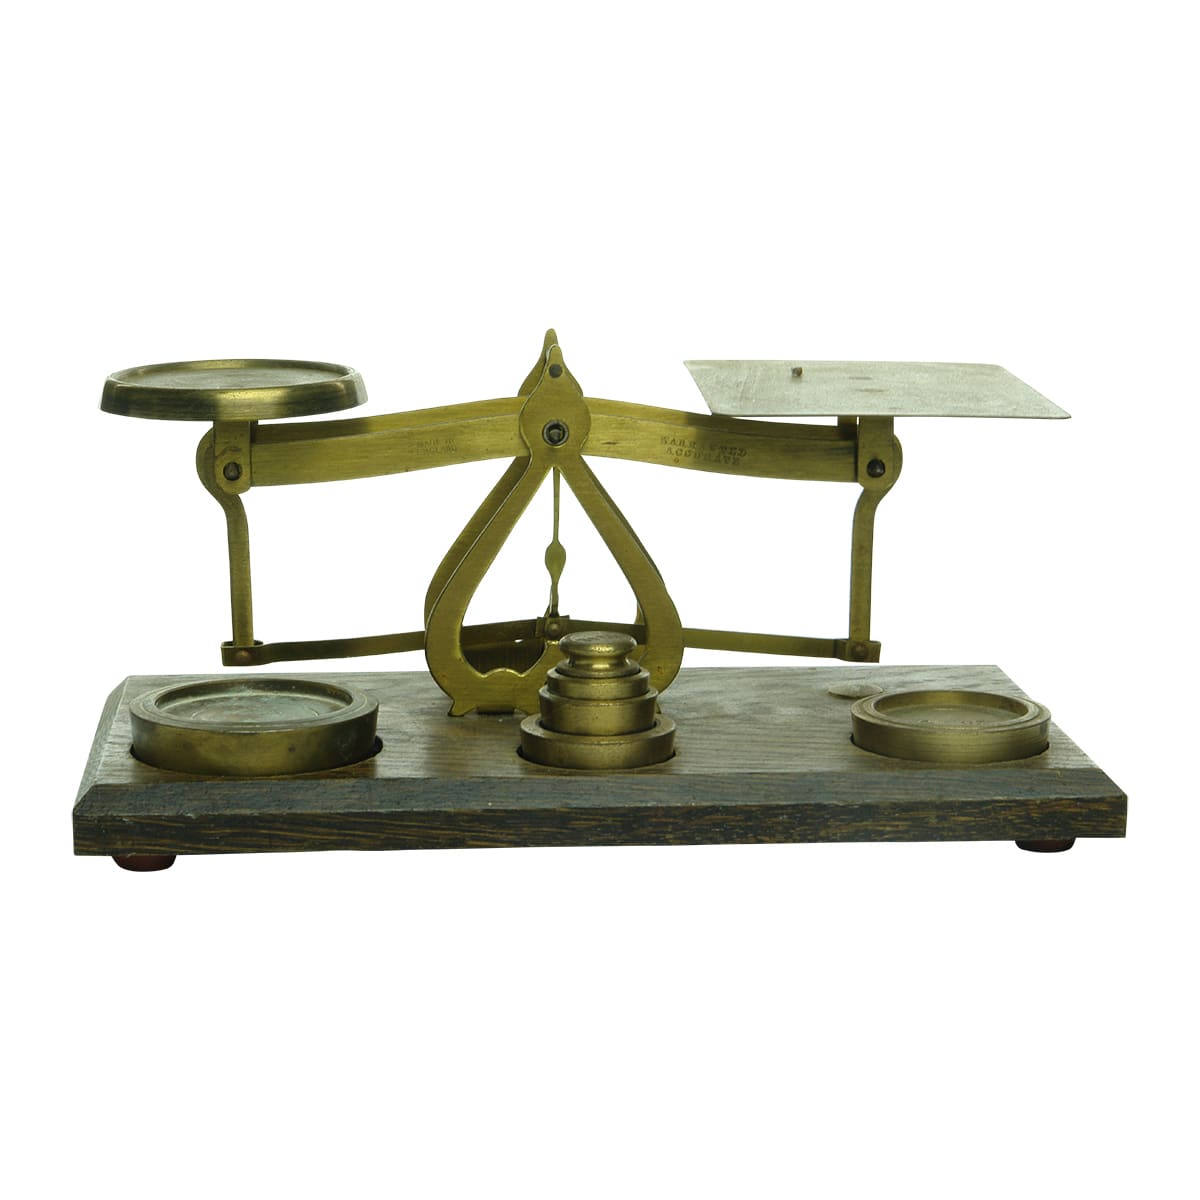 Brass Letter Scales & Weights